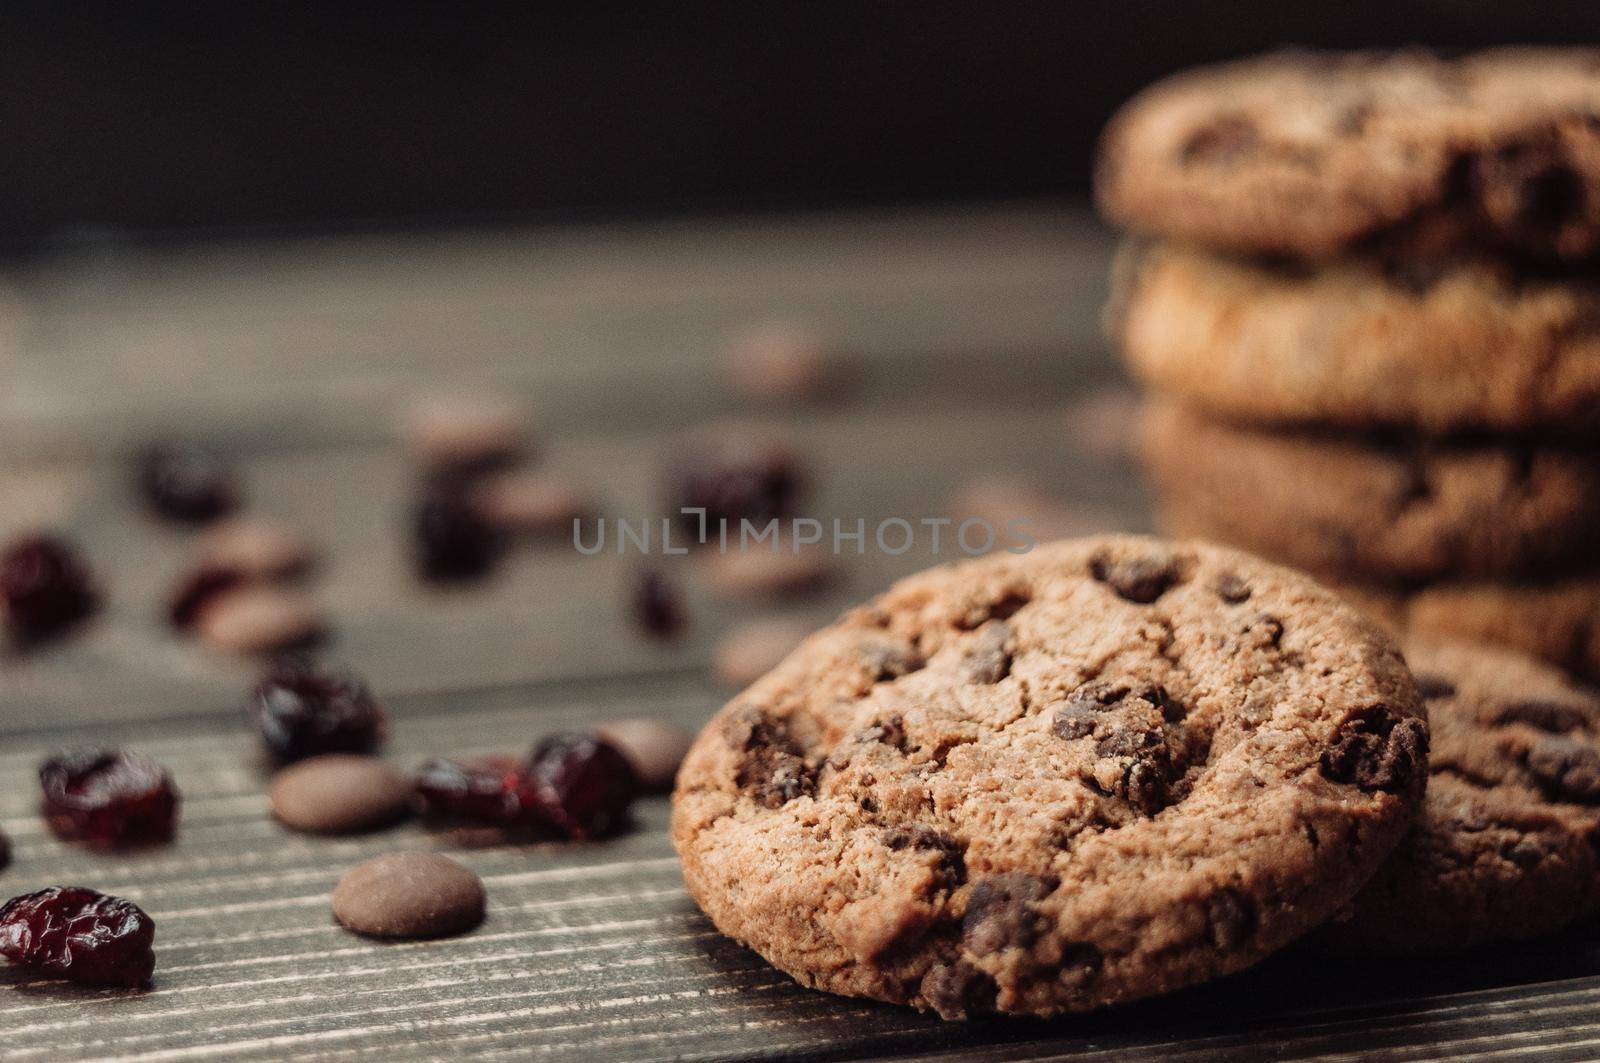 A stack of oatmeal cookies with chocolate pieces and candied fruits lies on a wooden table. Rustic table. Vintage toning. Dietary useful cookies without gluten. Copy space.